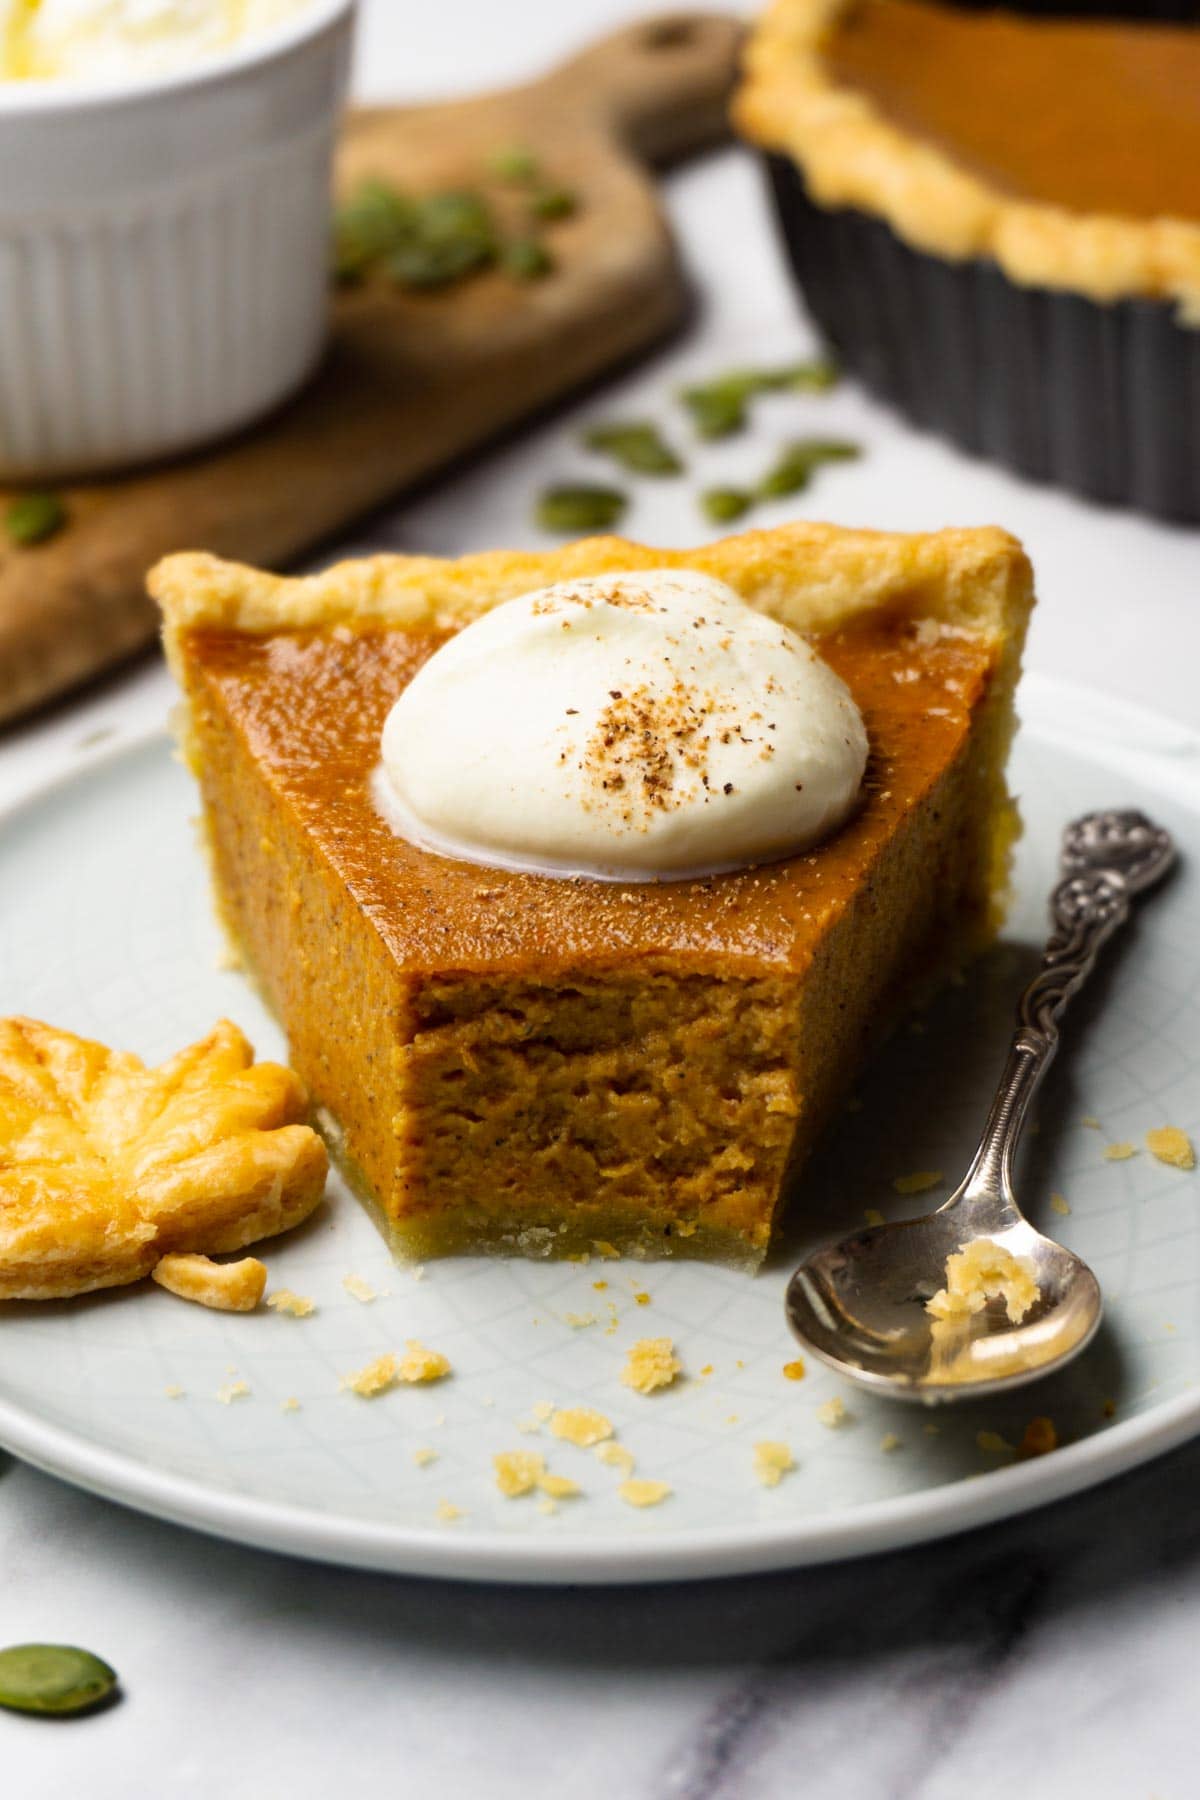 A slice of pumpkin pie topped with whipped heavy cream and ground nutmeg on a small round plate with silver spoon and a maple leave made of puff pastry, one bite taken.